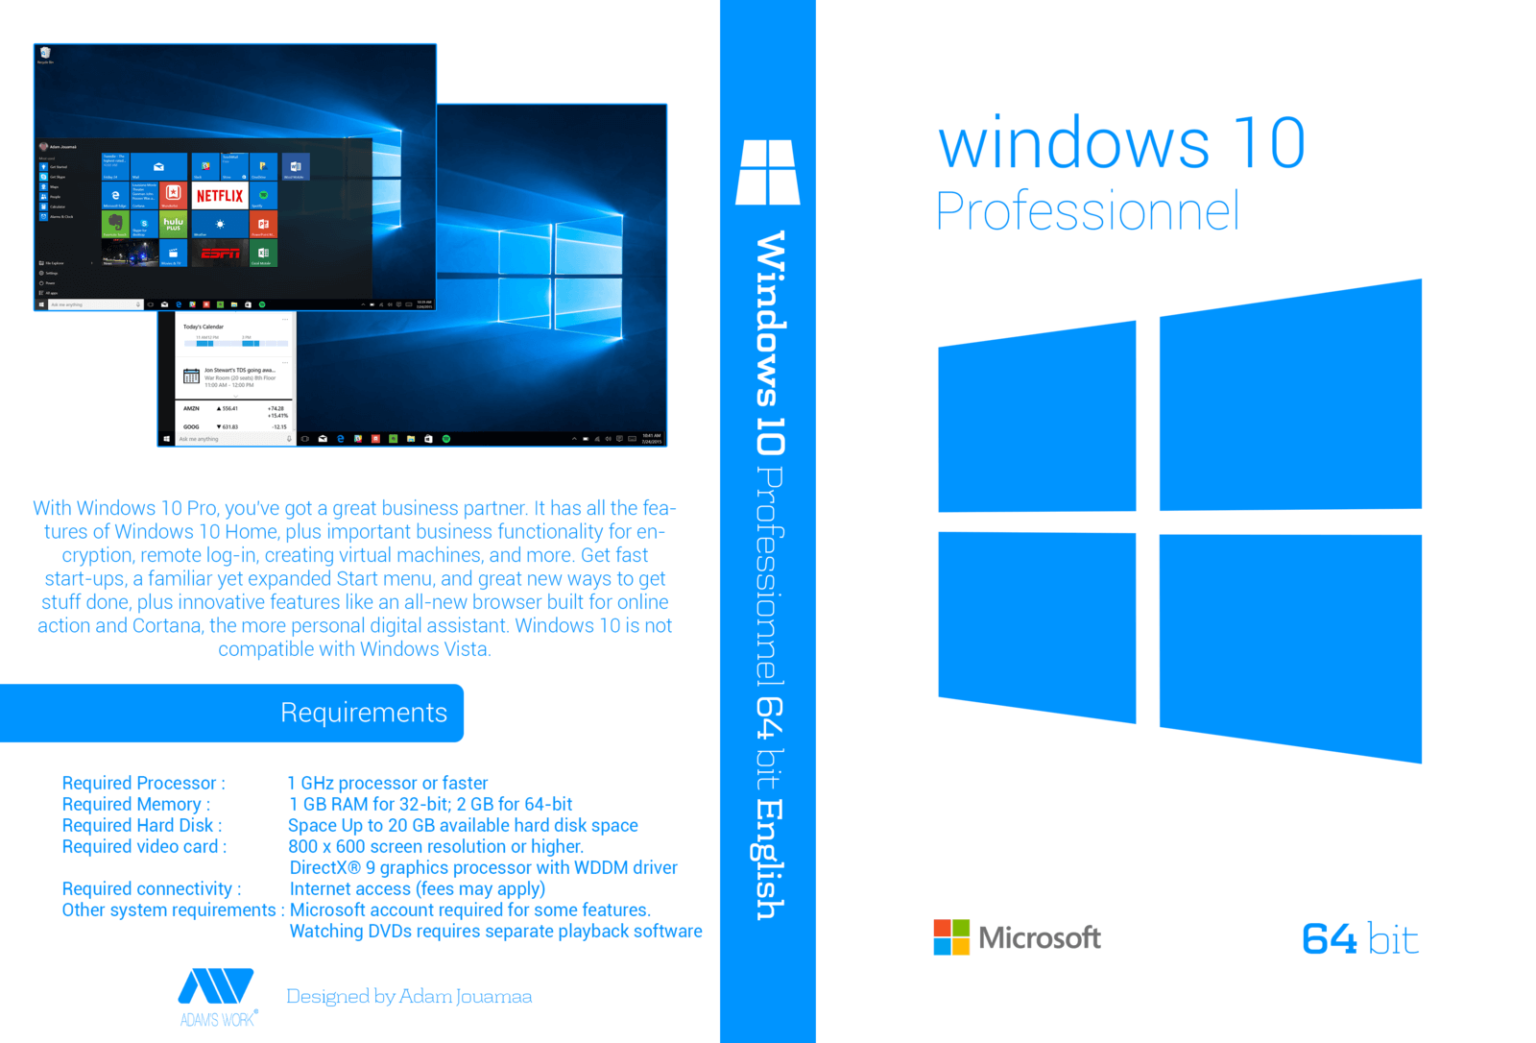 360 security for pc windows 10 32 bit download